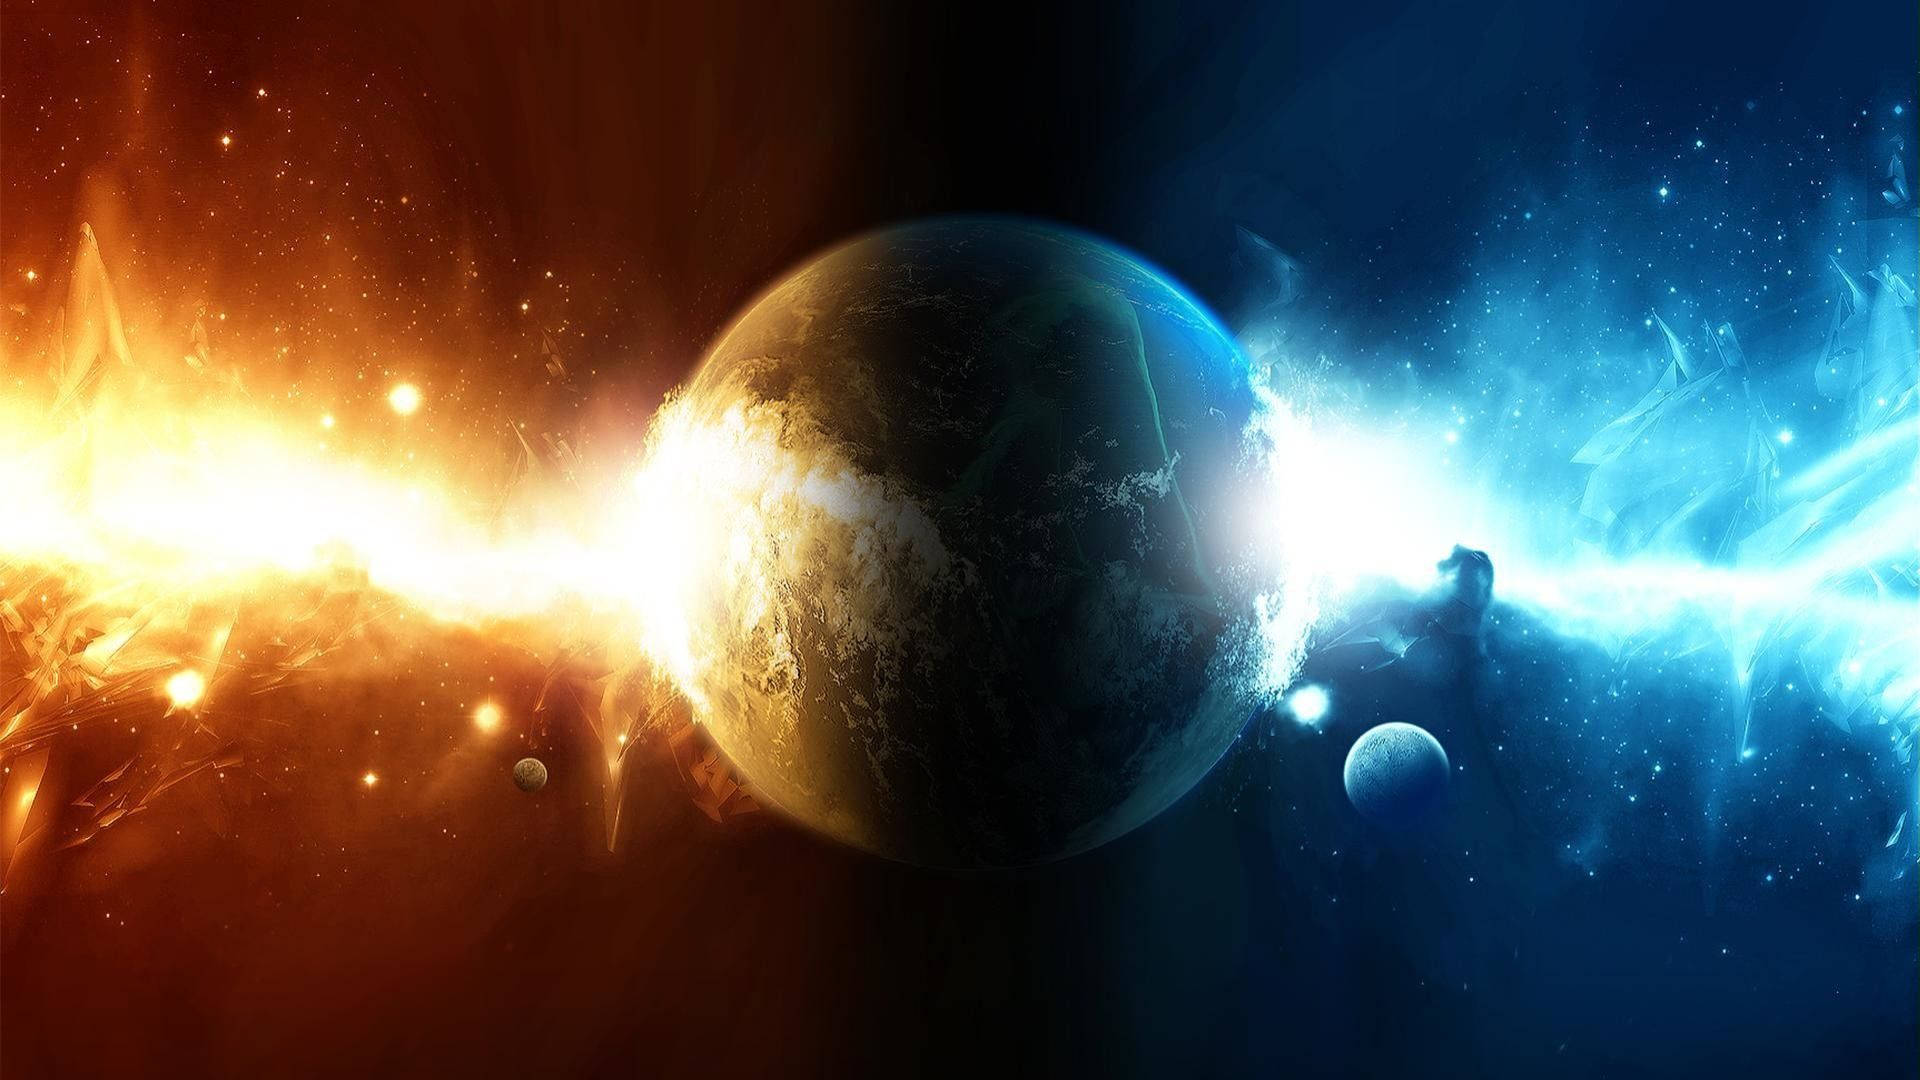 Amazing Water And Fire Planet Wallpaper